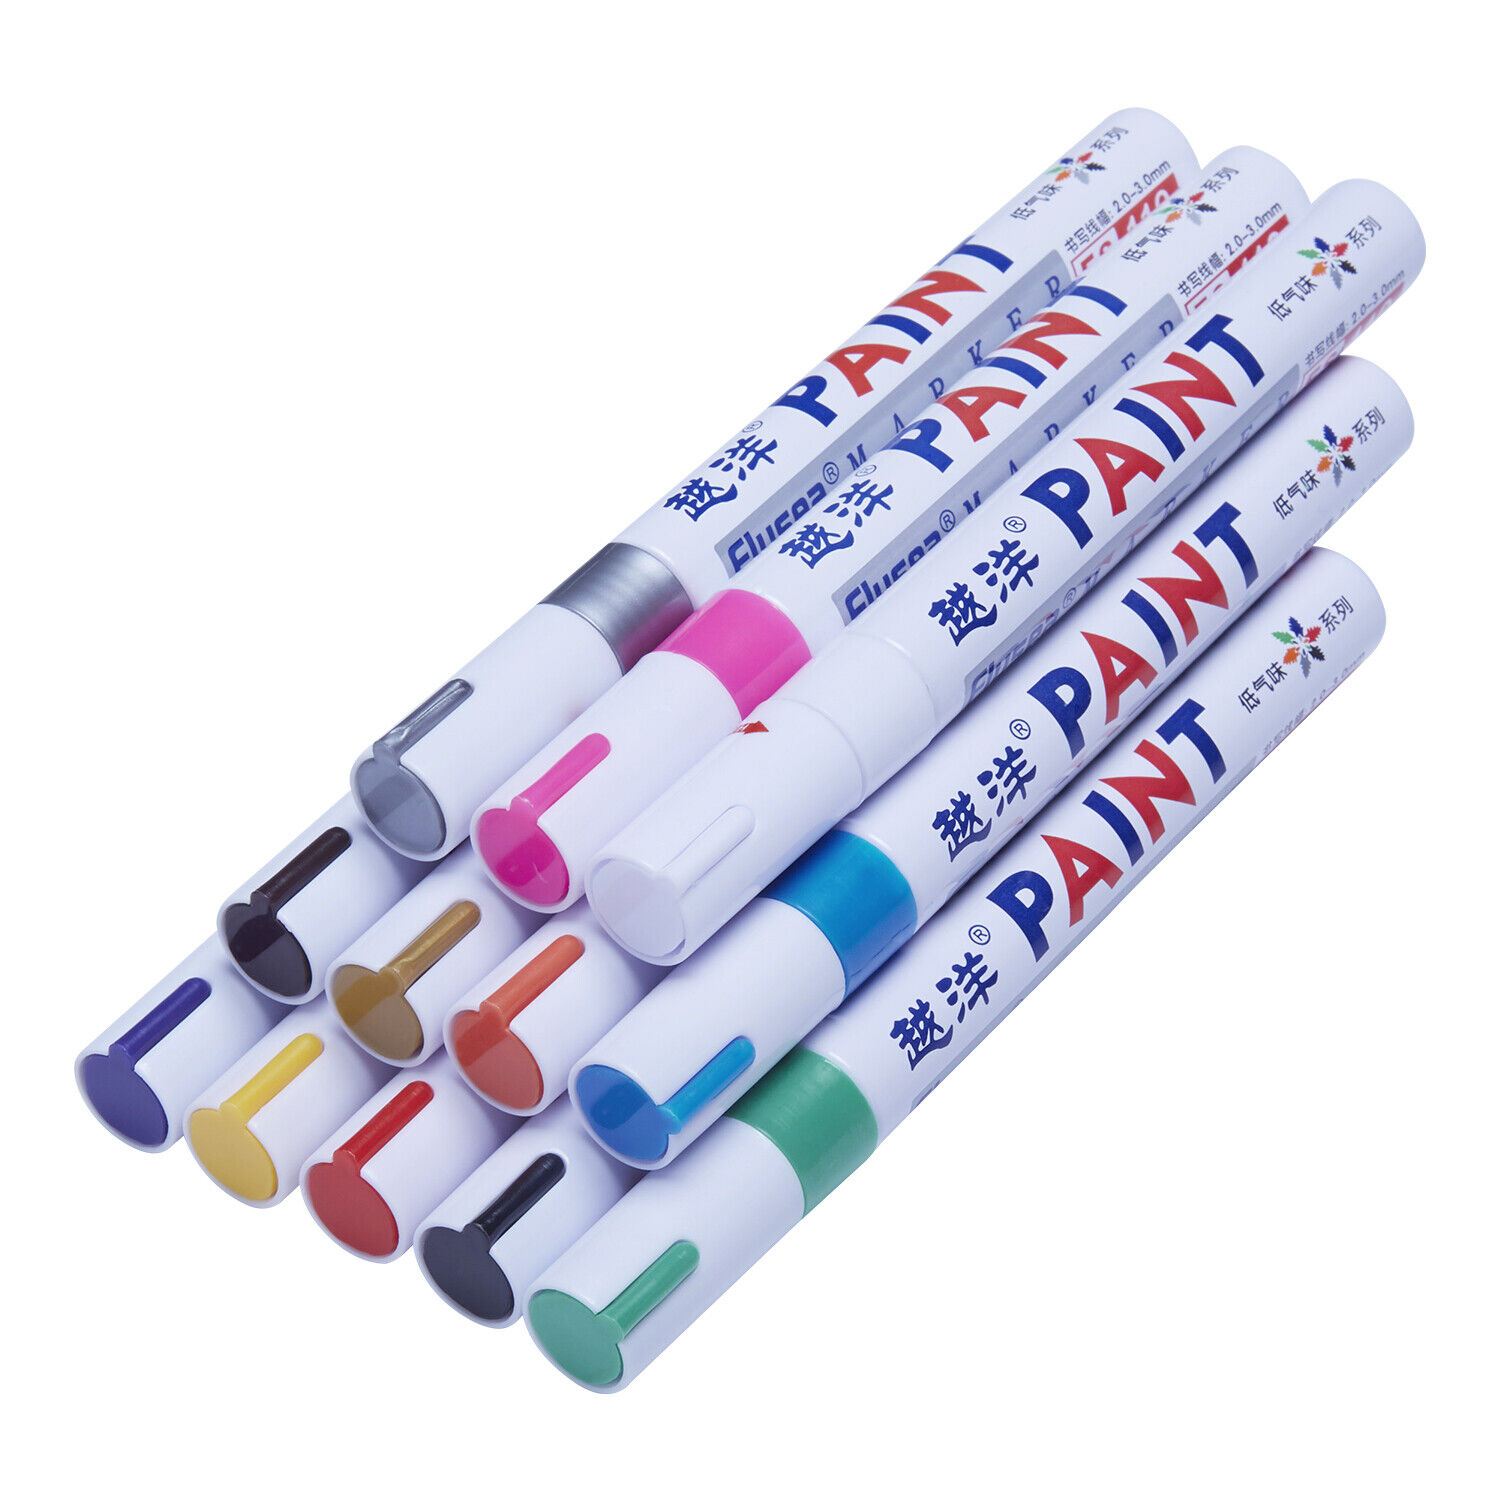 12Pcs Waterproof Permanent Paint Marker Pen For Car Tyre Tire Tread Rubber Metal Unbranded Does Not Apply - фотография #12